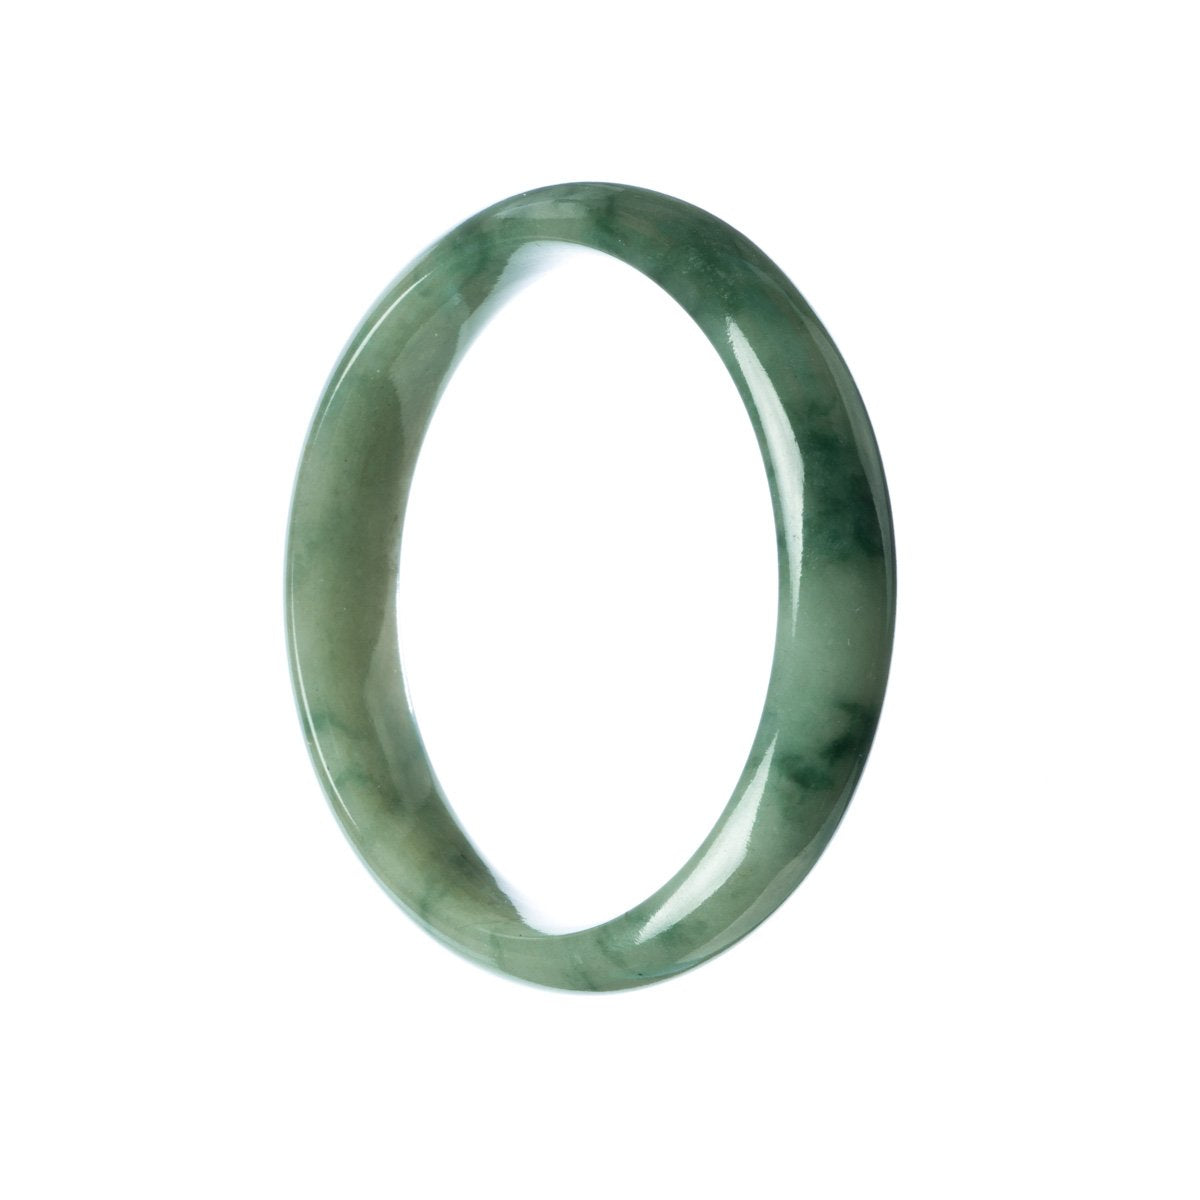 A half-moon shaped grade A green traditional jade bangle, measuring 59mm in size, made by MAYS™.